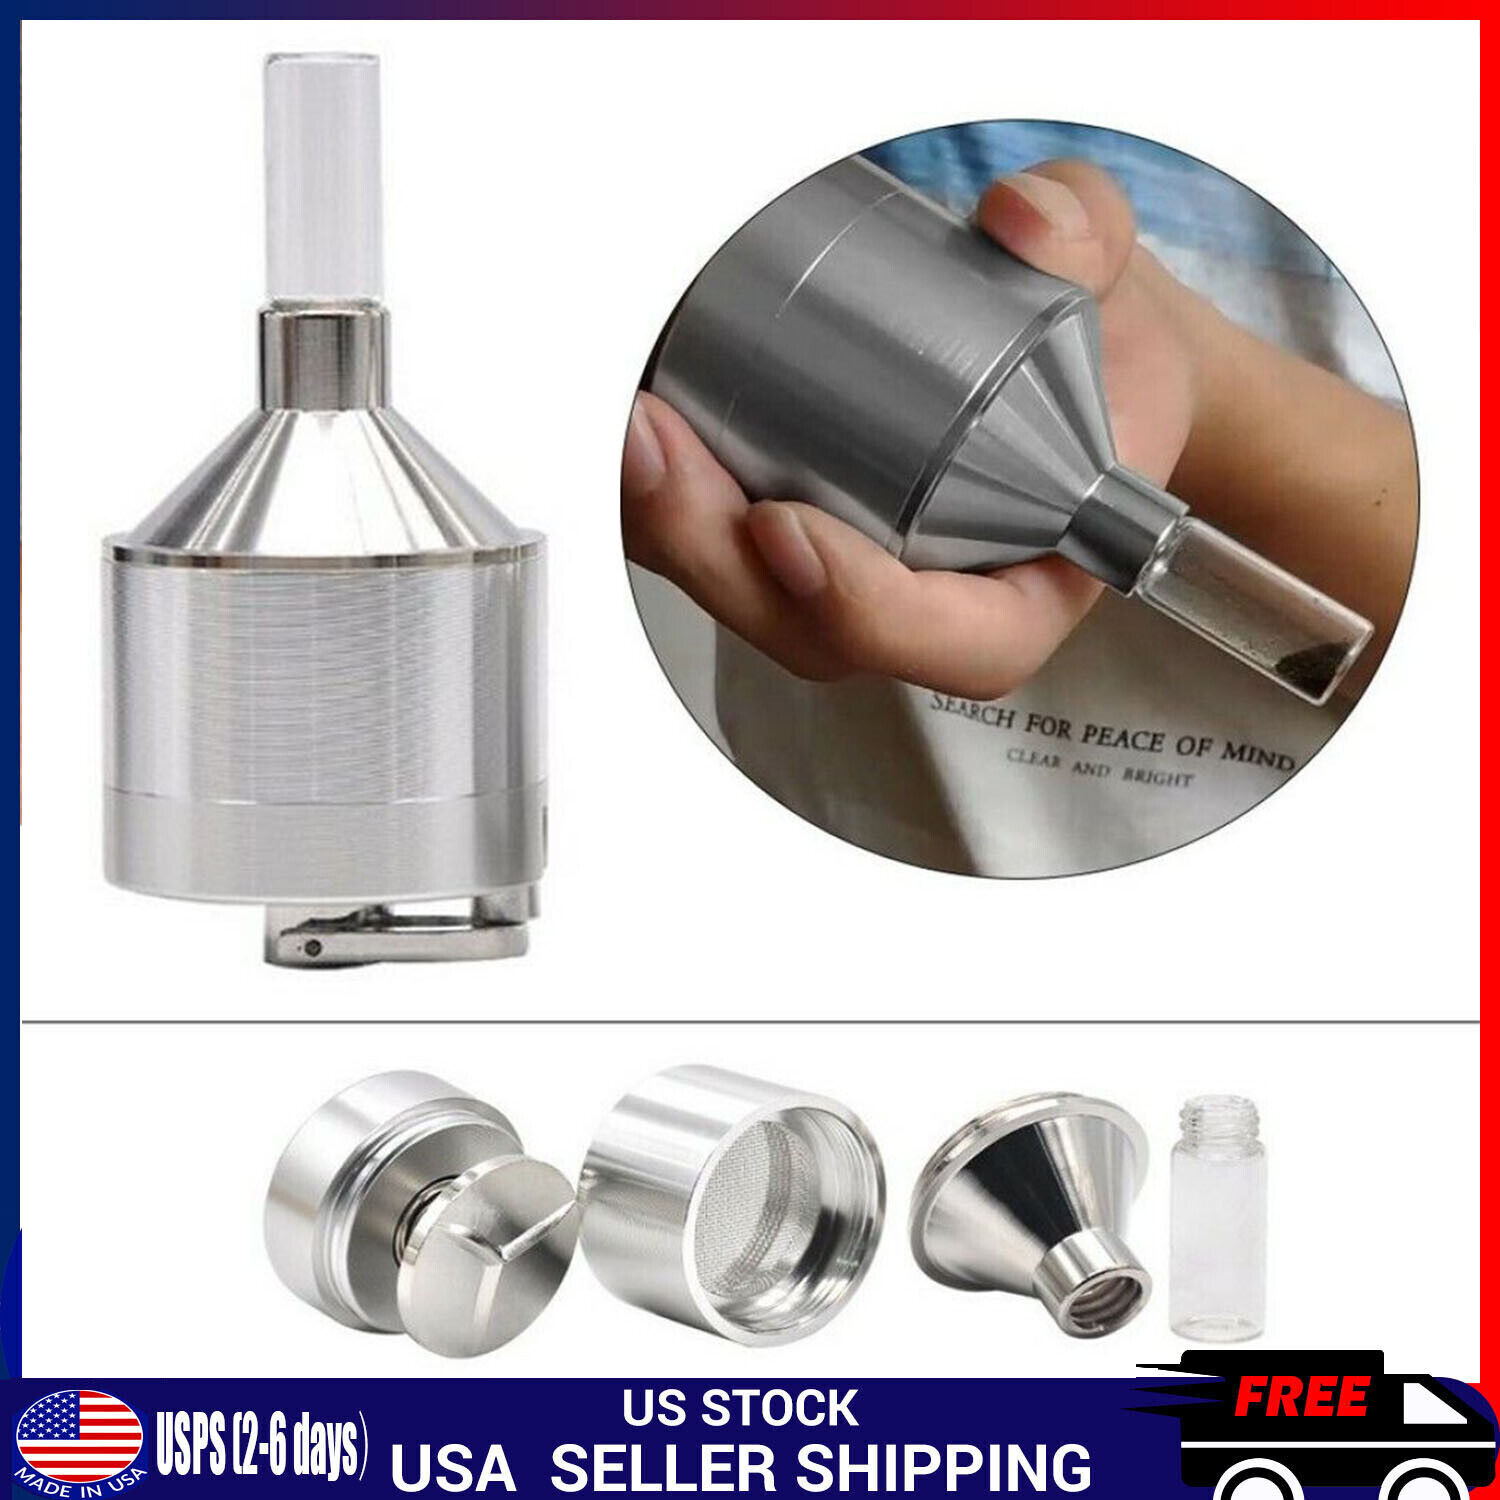 Portable Metal Powder Grinder Hand Mill Funnel Tool with Snuff Glass Bottles NEW